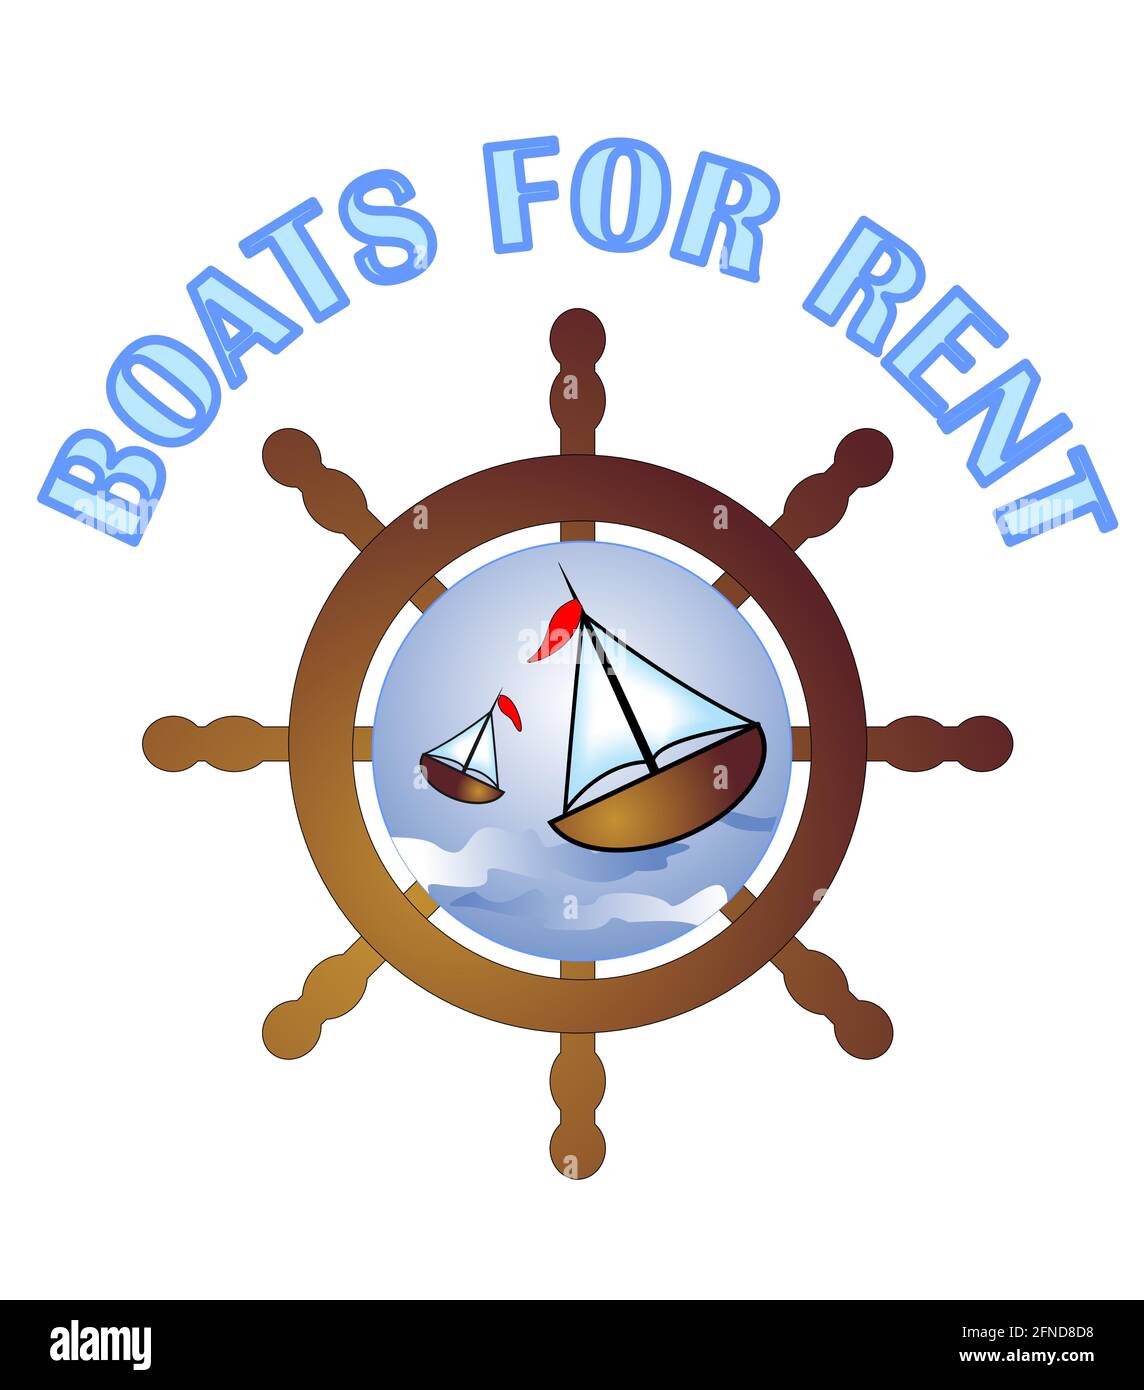 Boats for rent label with a rudder and sailboat Stock Vector